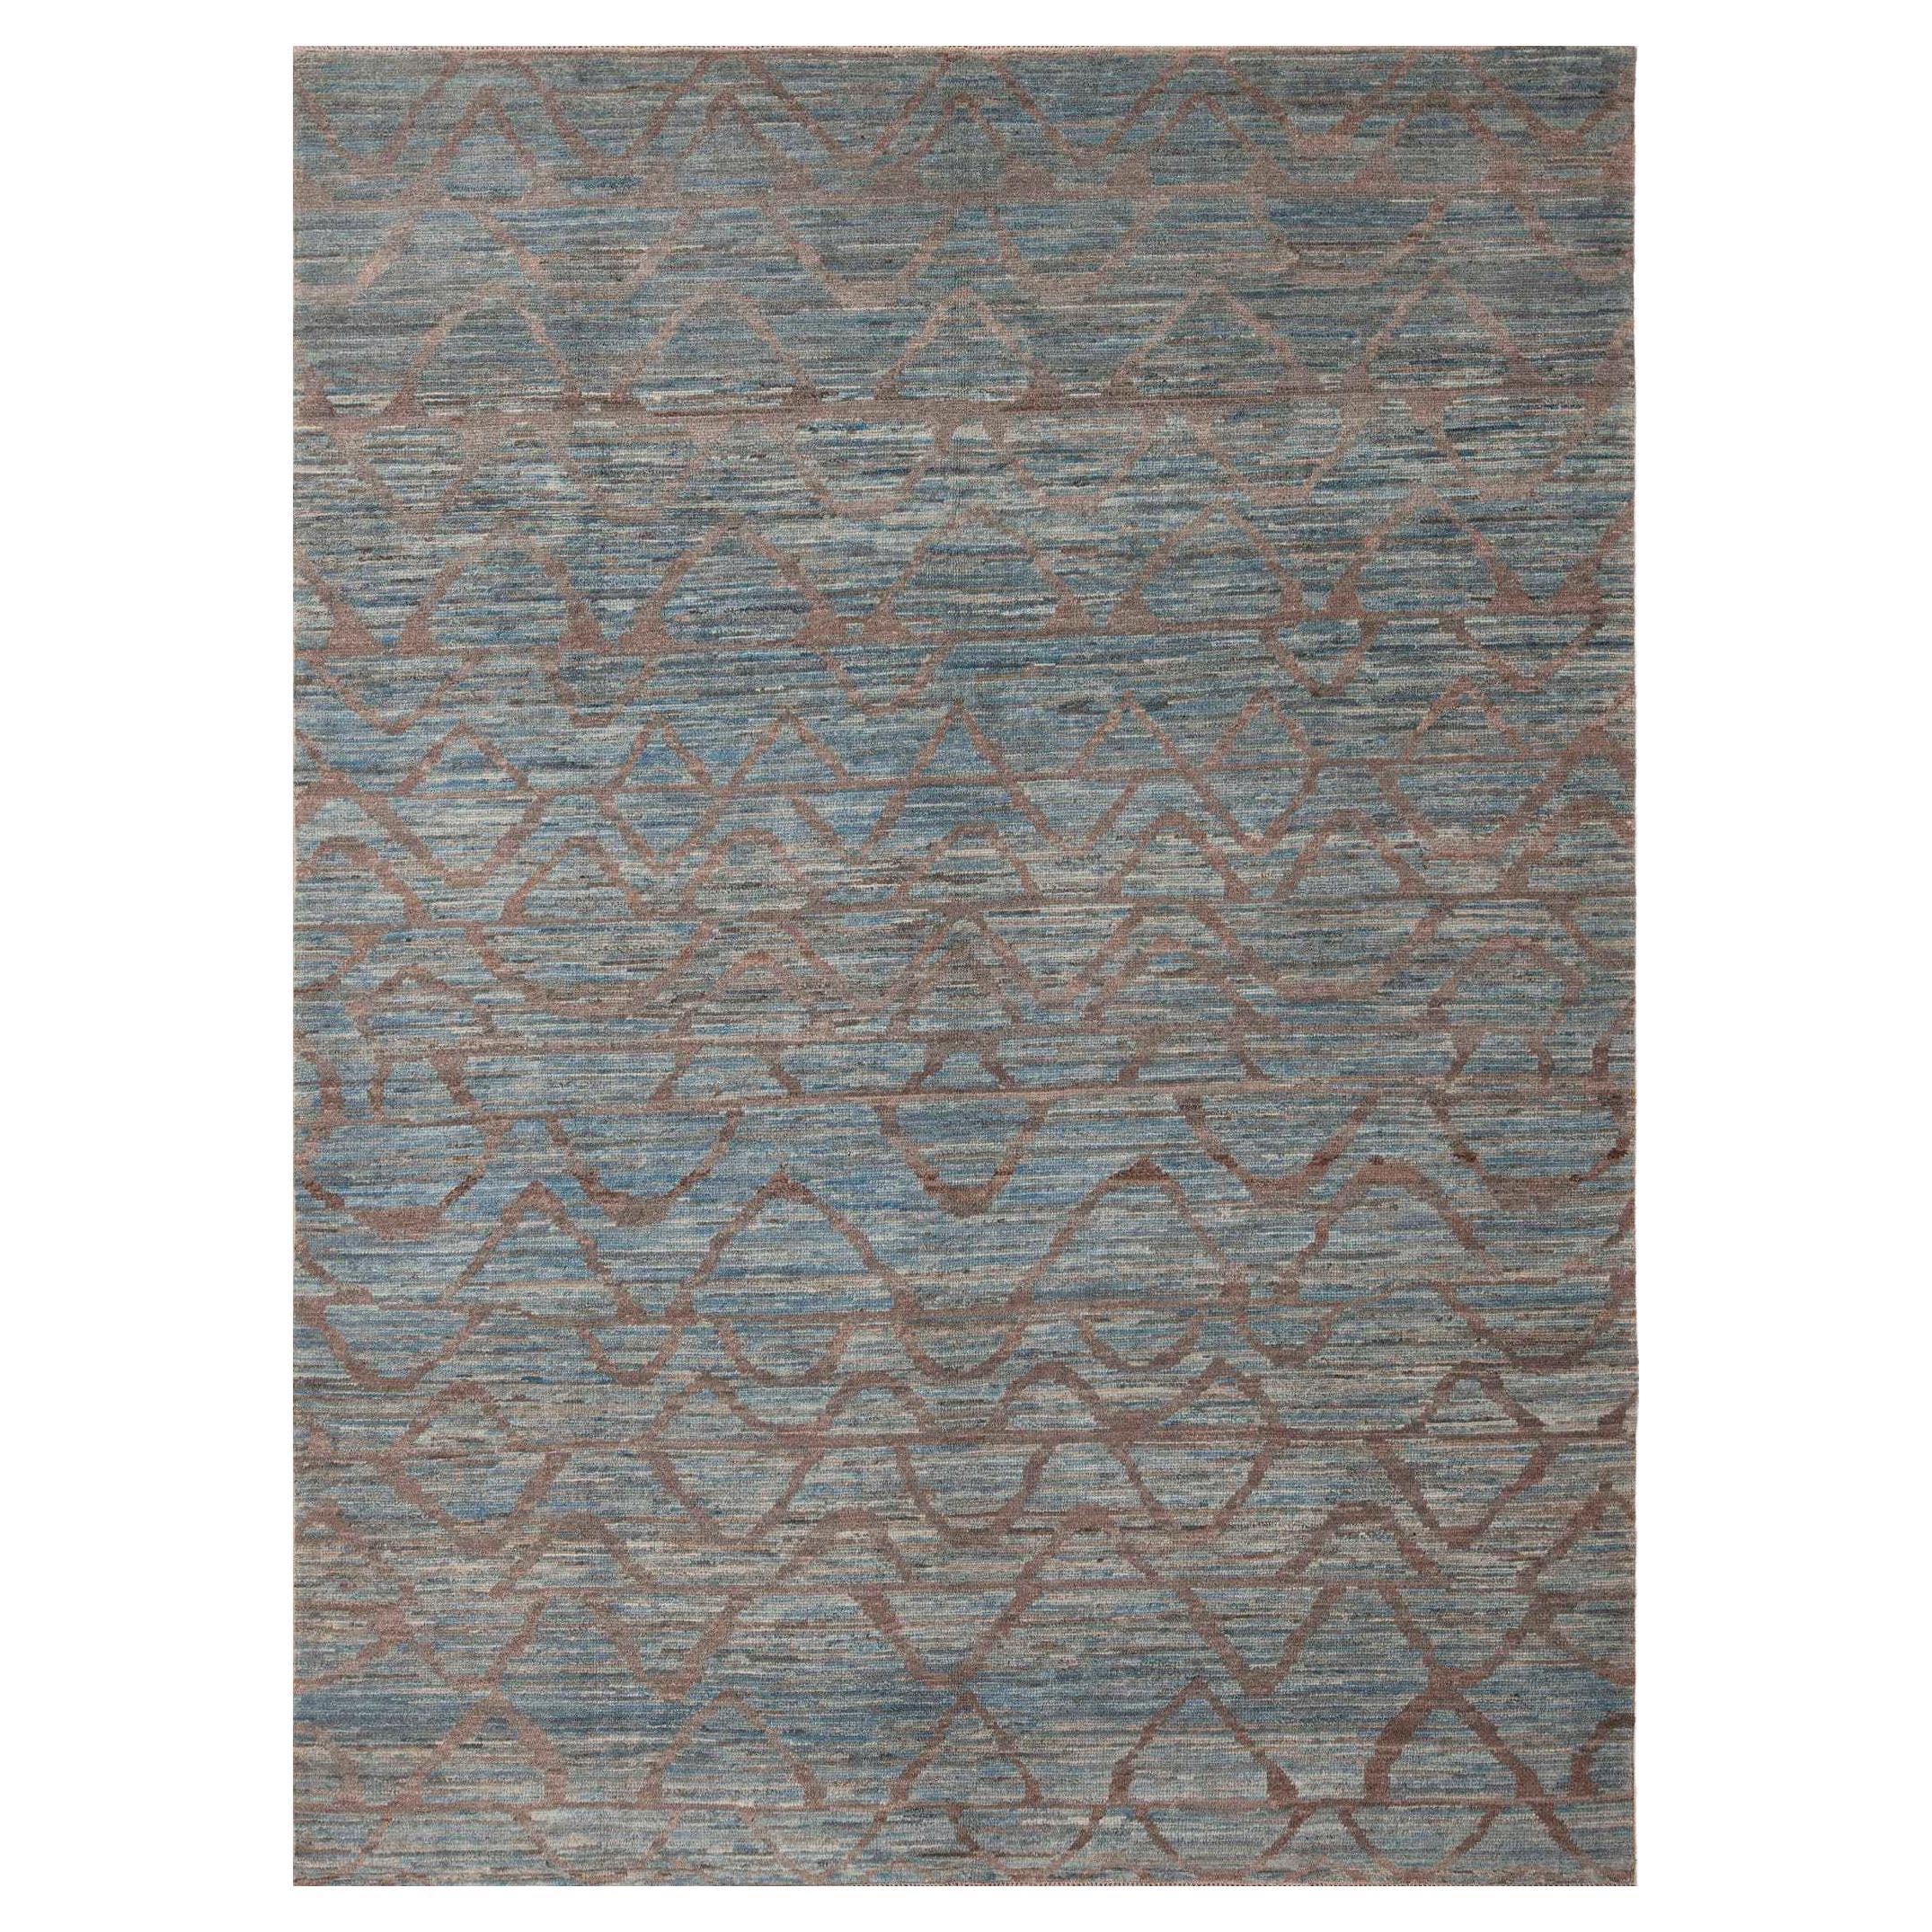 The Collective Blue and Brown Abstract Wavy Design Modern Rug 6'11" x 9'8" (tapis moderne)